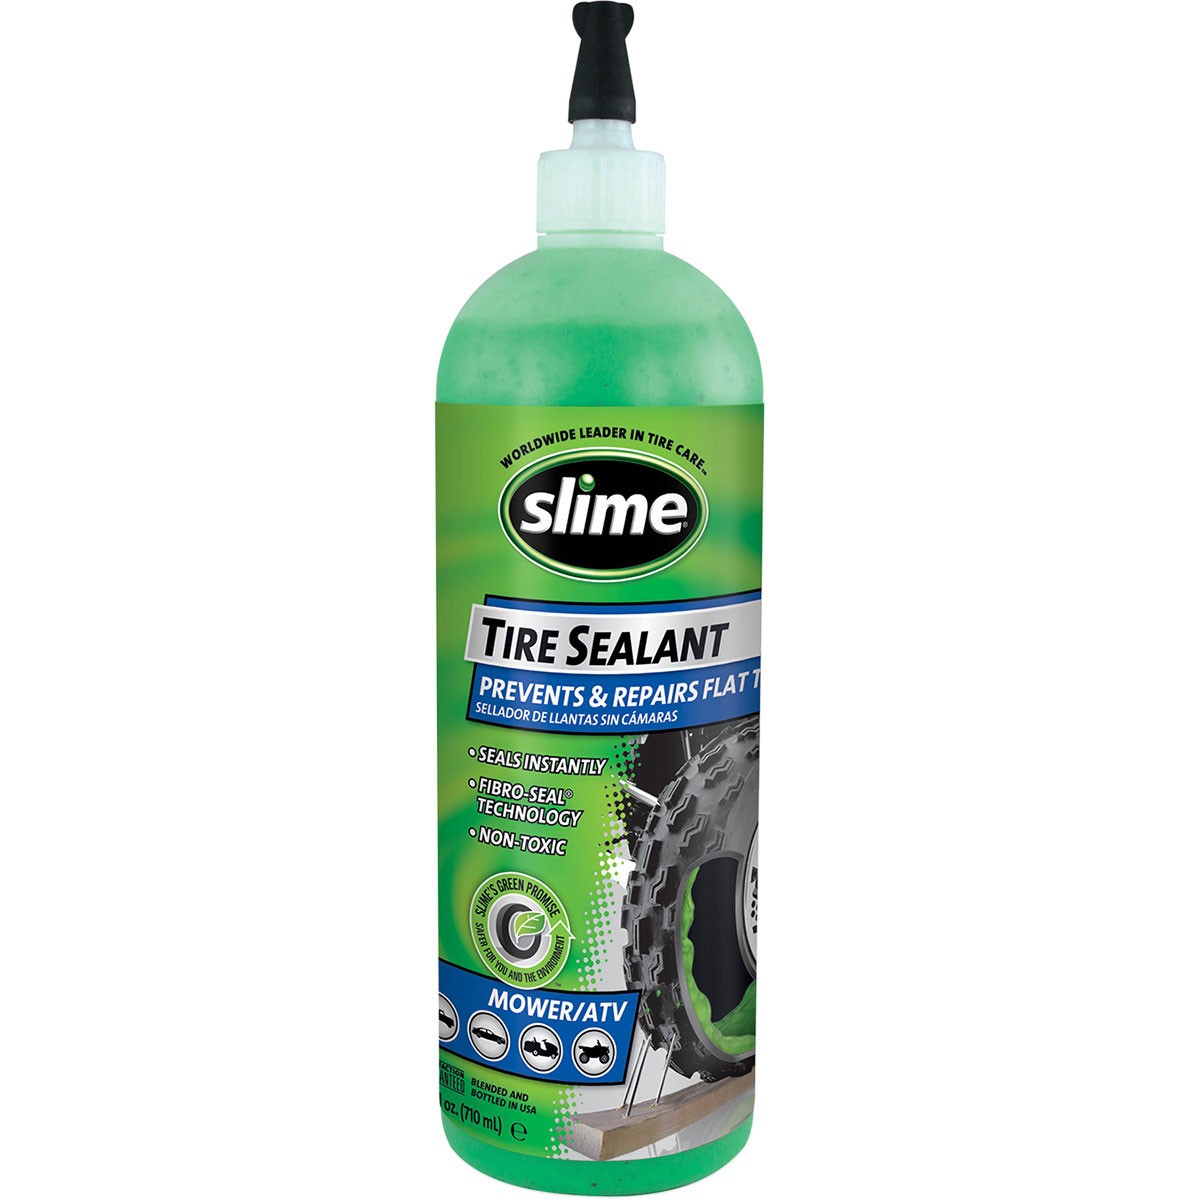 How do you seal a tubeless tire?